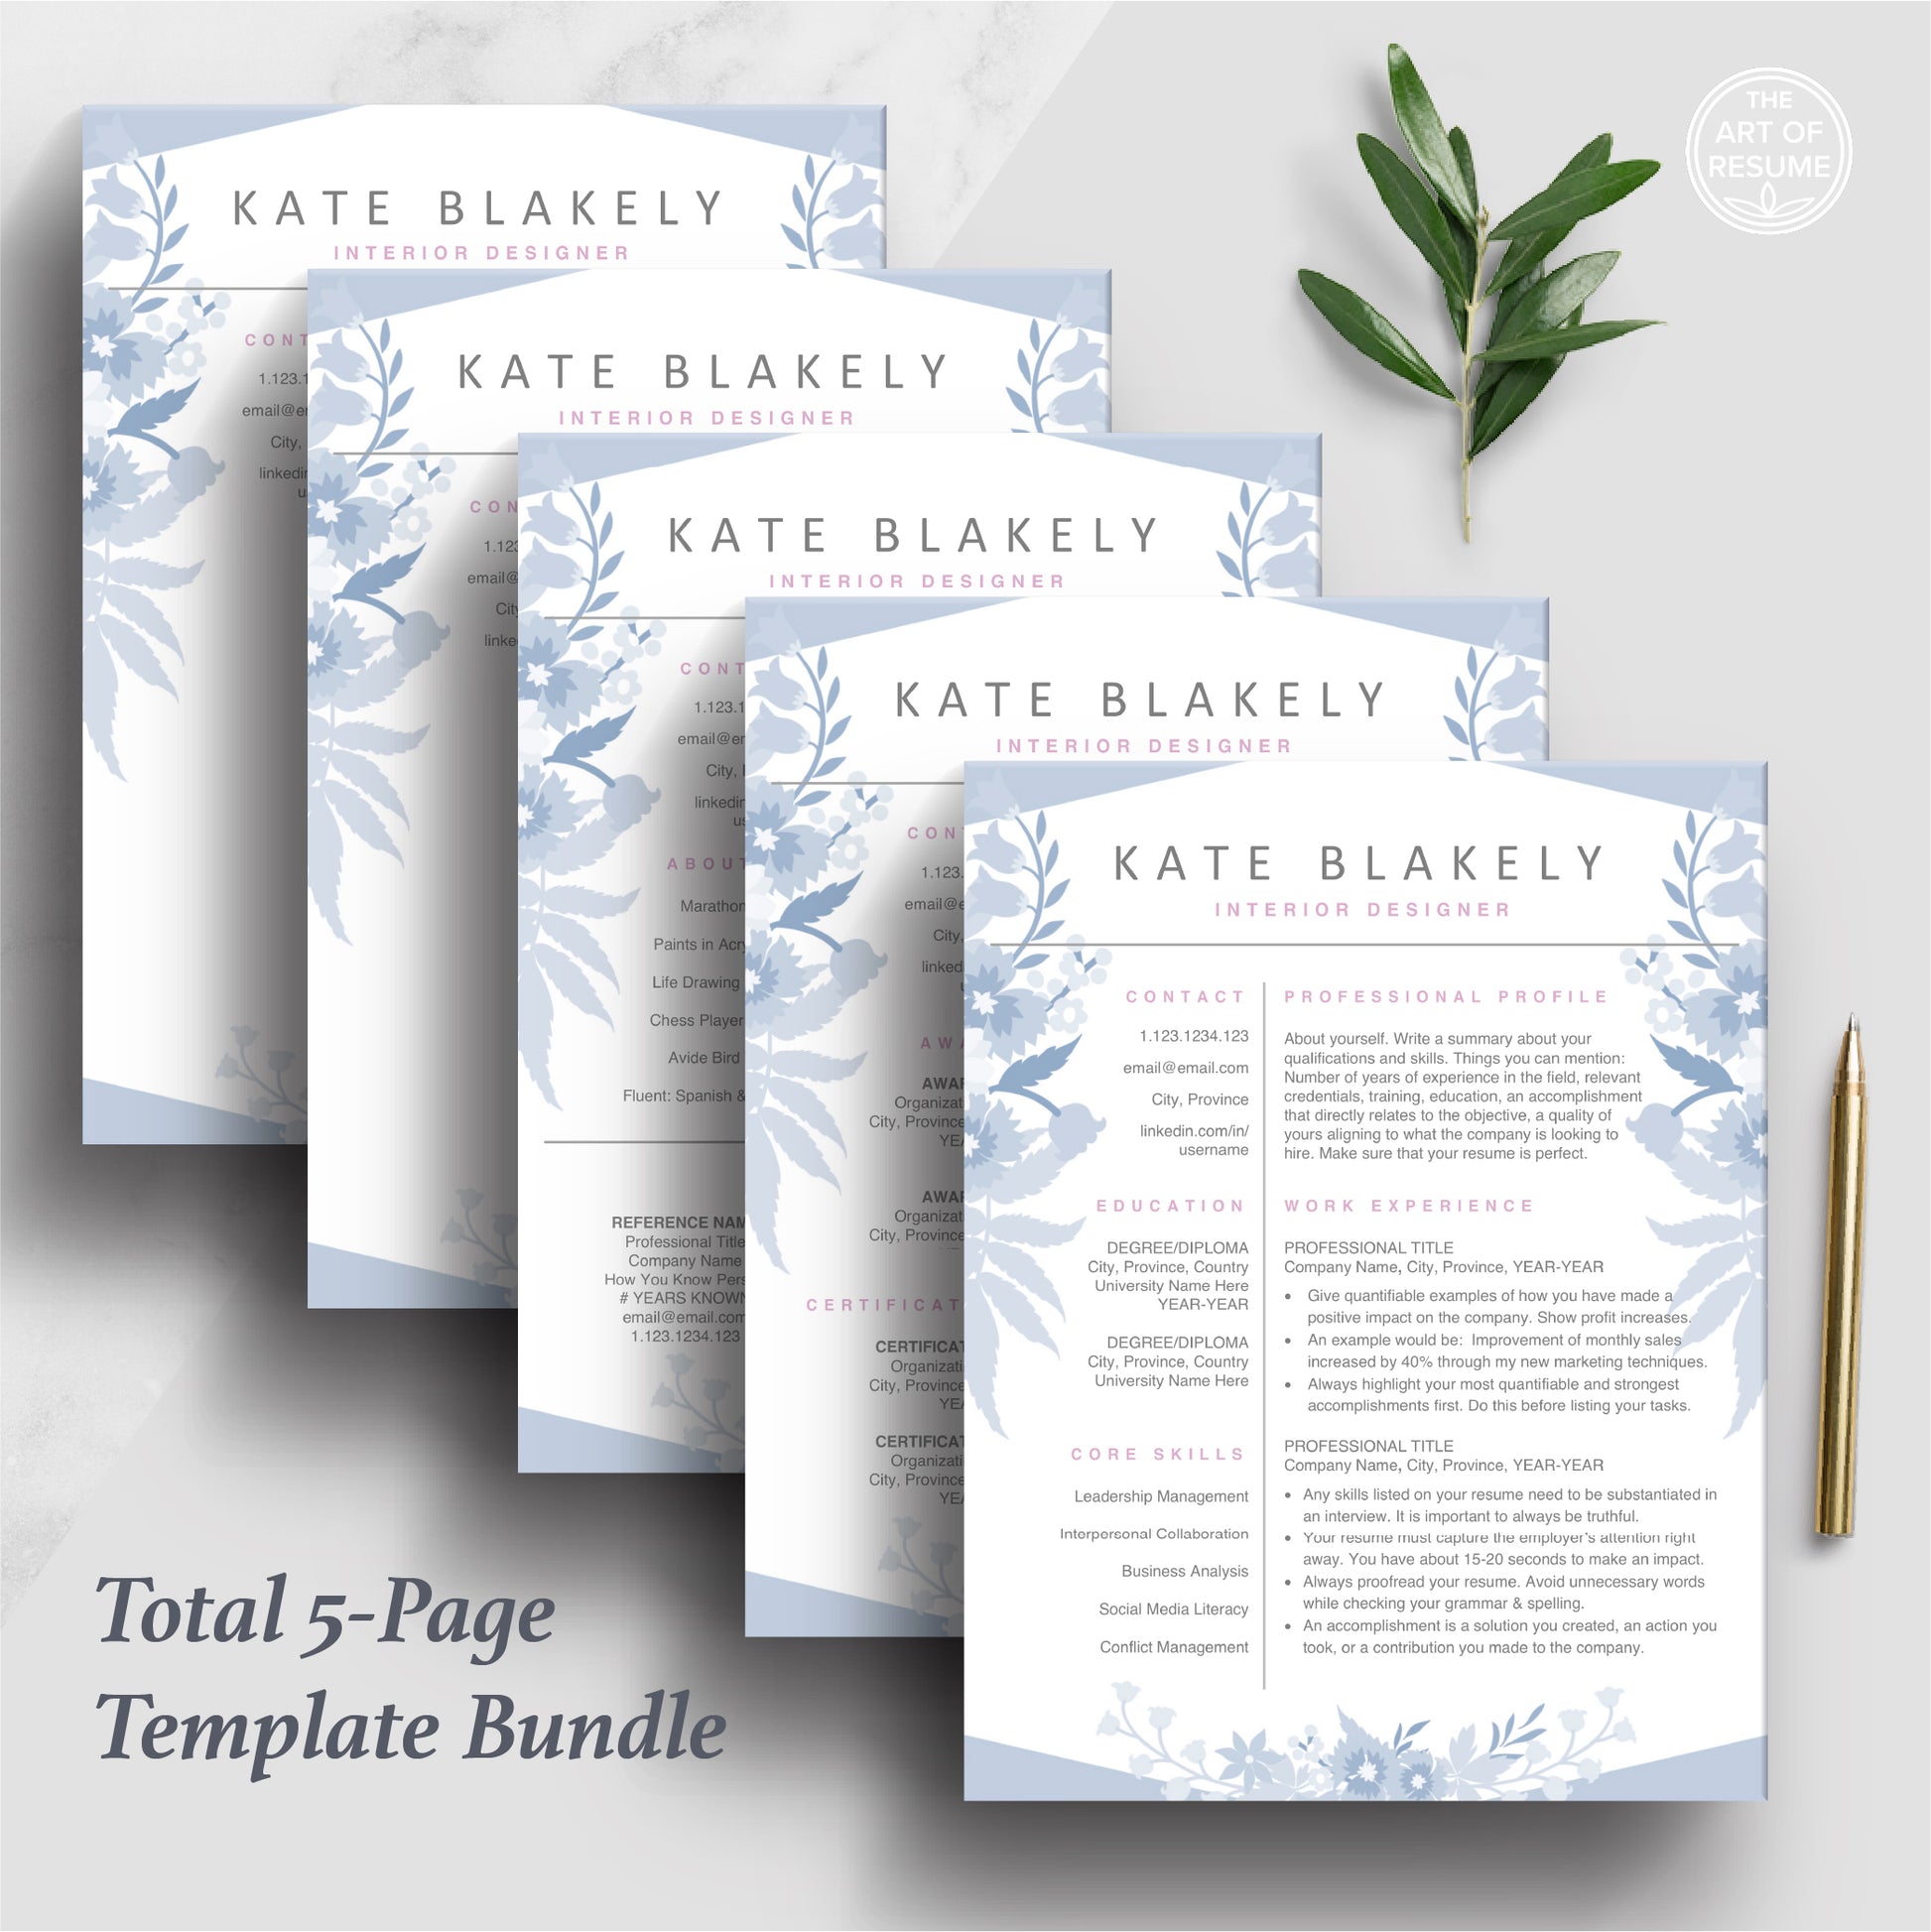 The Art of Resume | Blue Floral Resume Template Design | 5 Page Template bundle